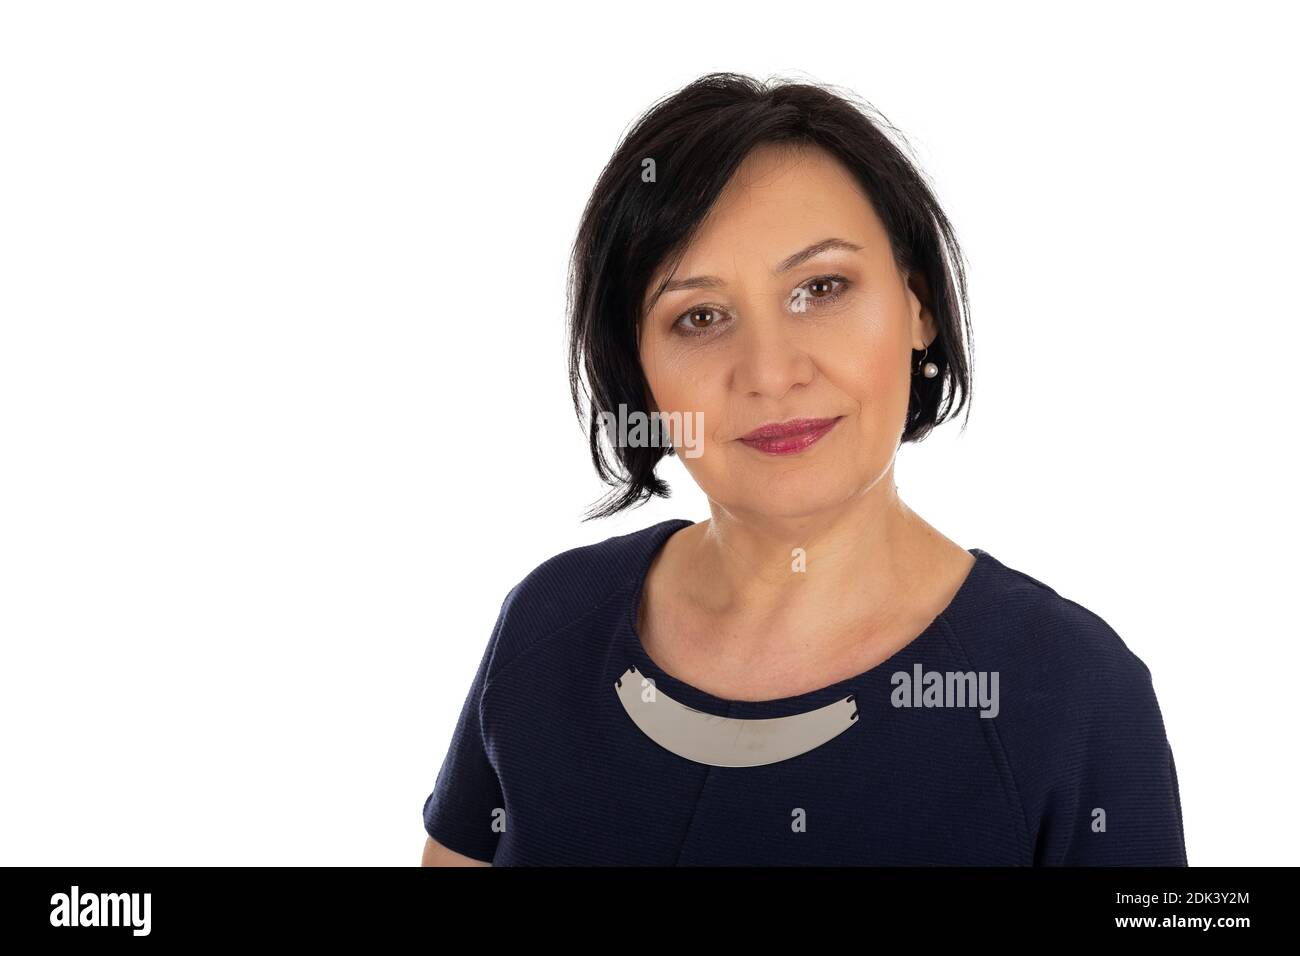 Portrait of beautiful middle aged woman posing on isolated background Stock Photo